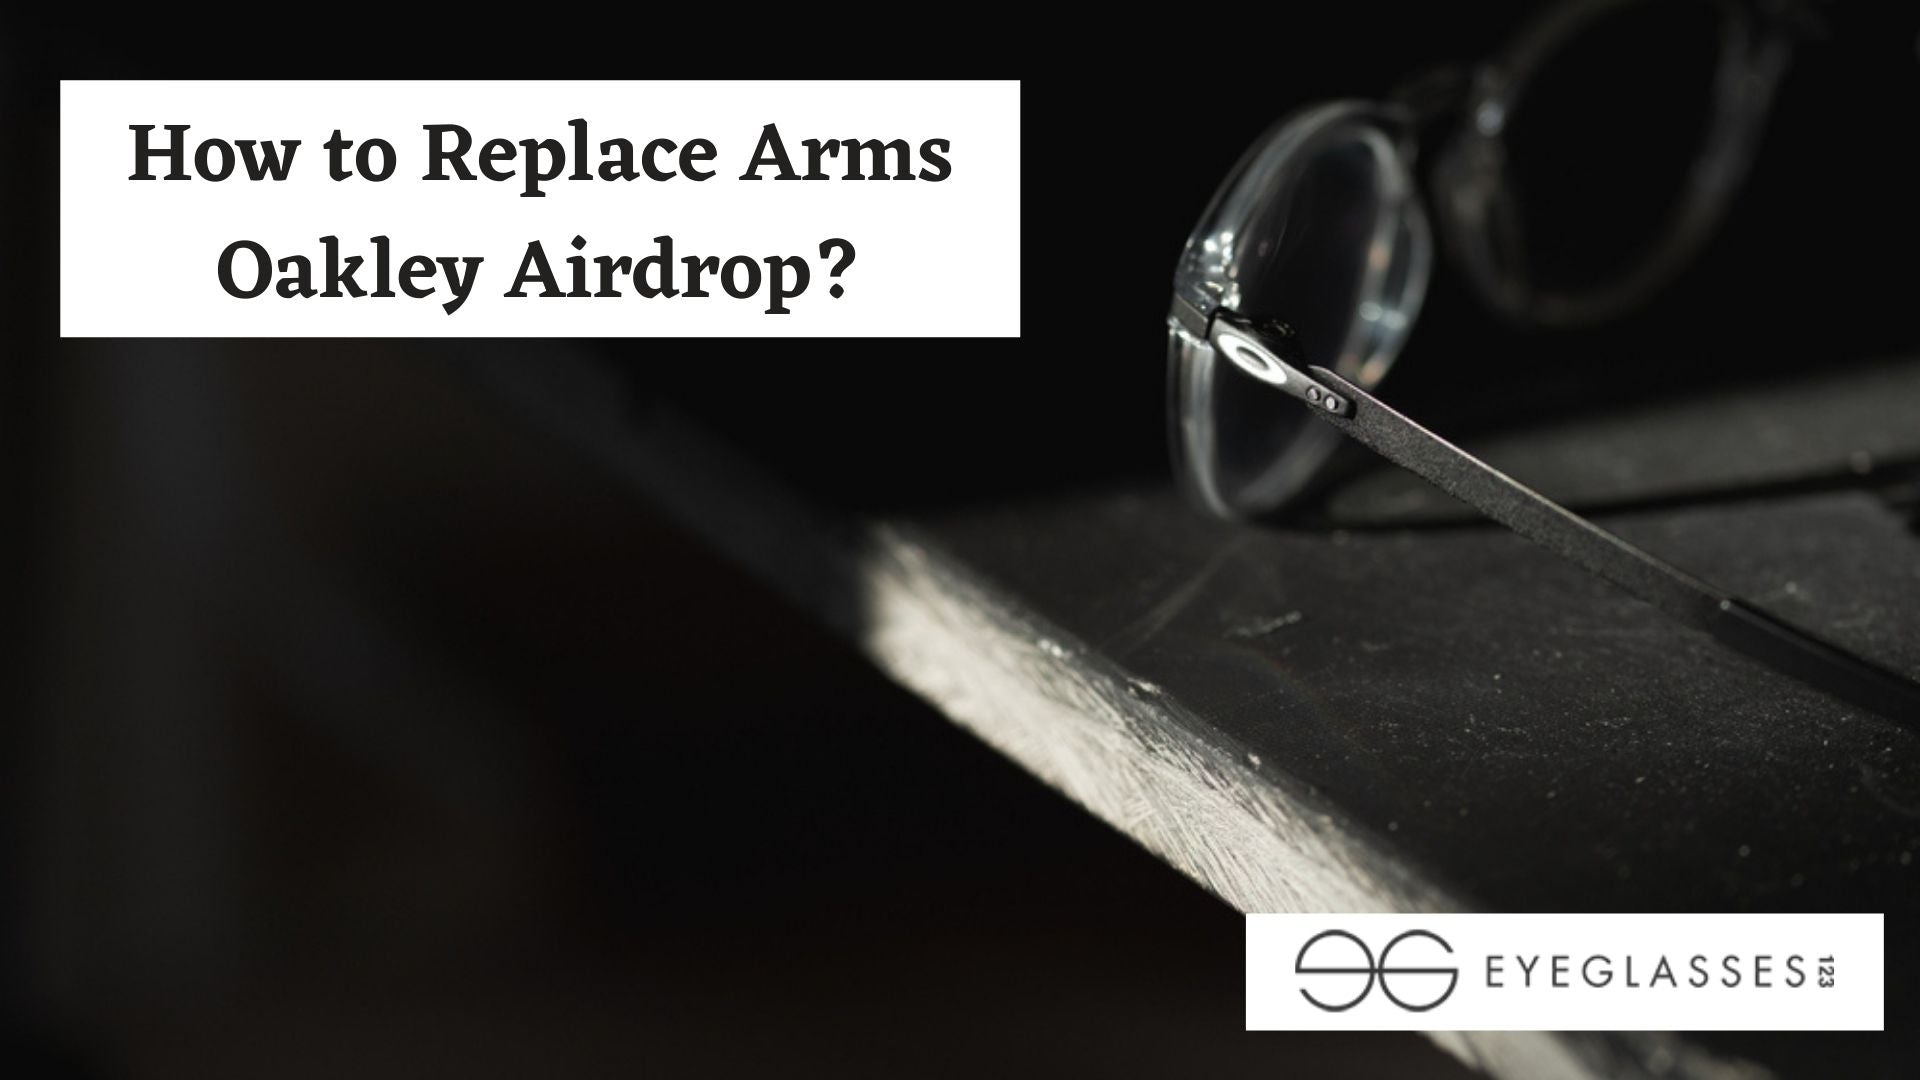 How to Replace Arms Oakley Airdrop